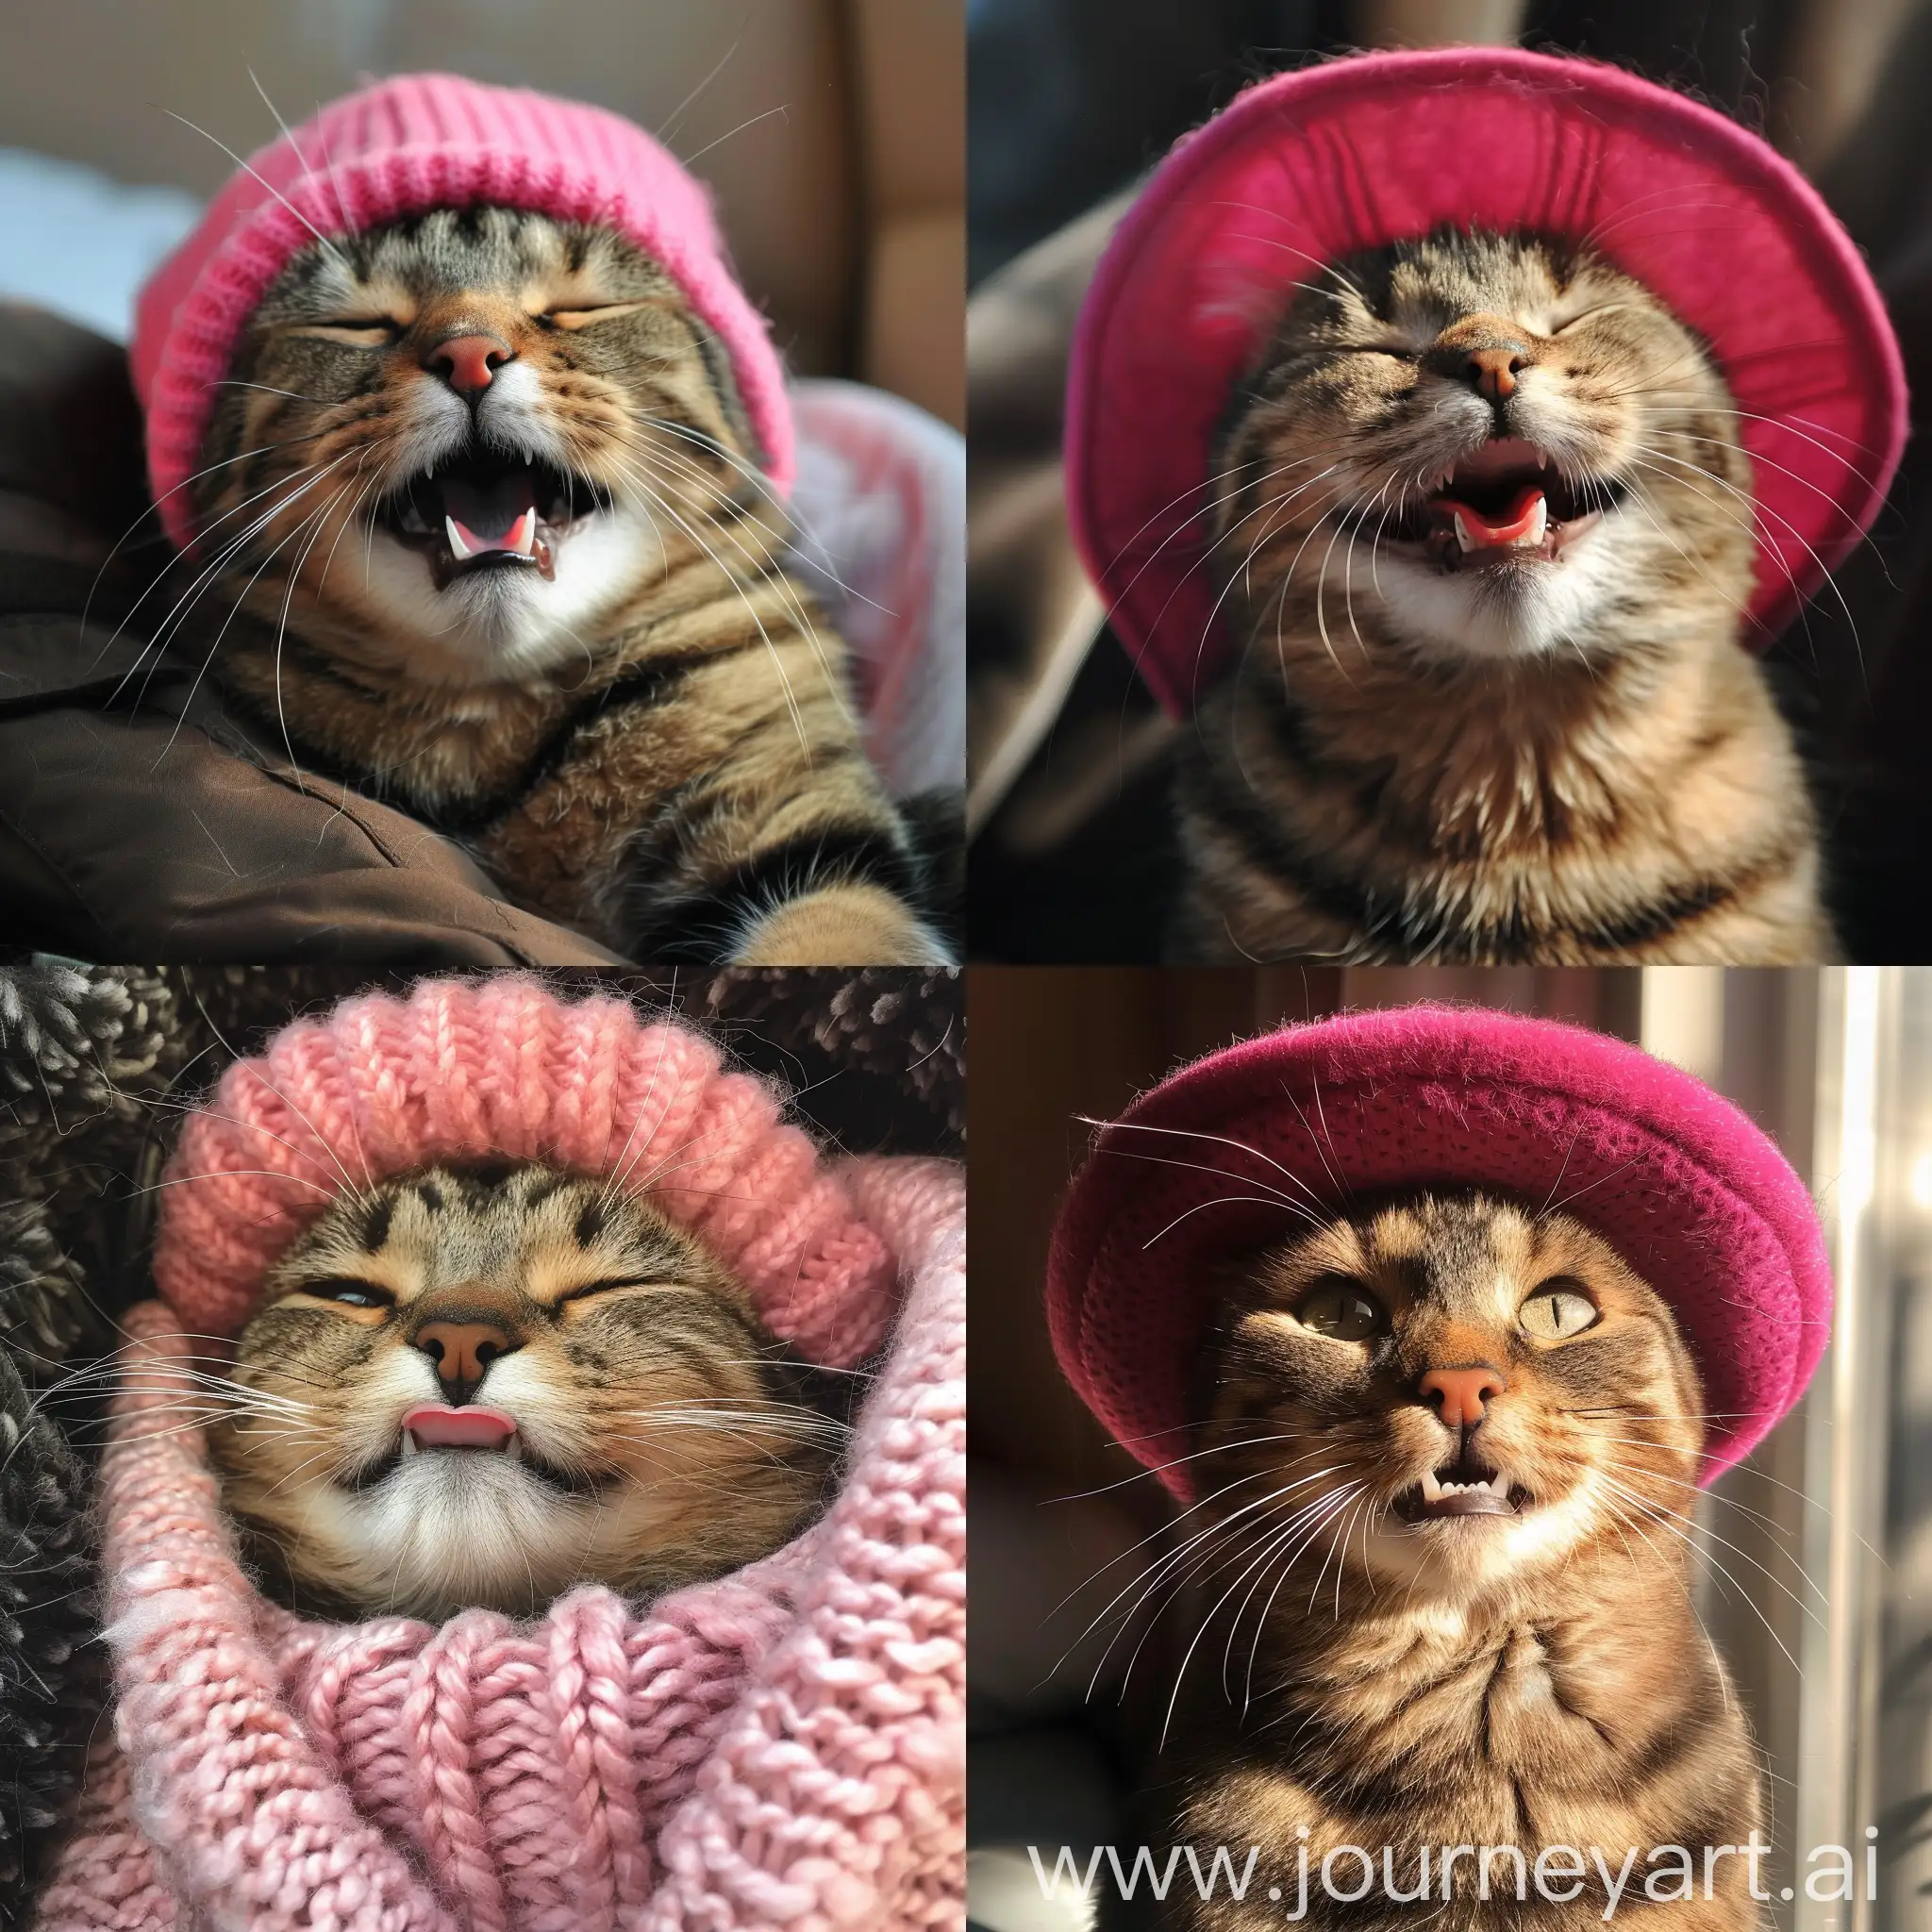 Cheerful-Cat-Wearing-a-Pink-Hat